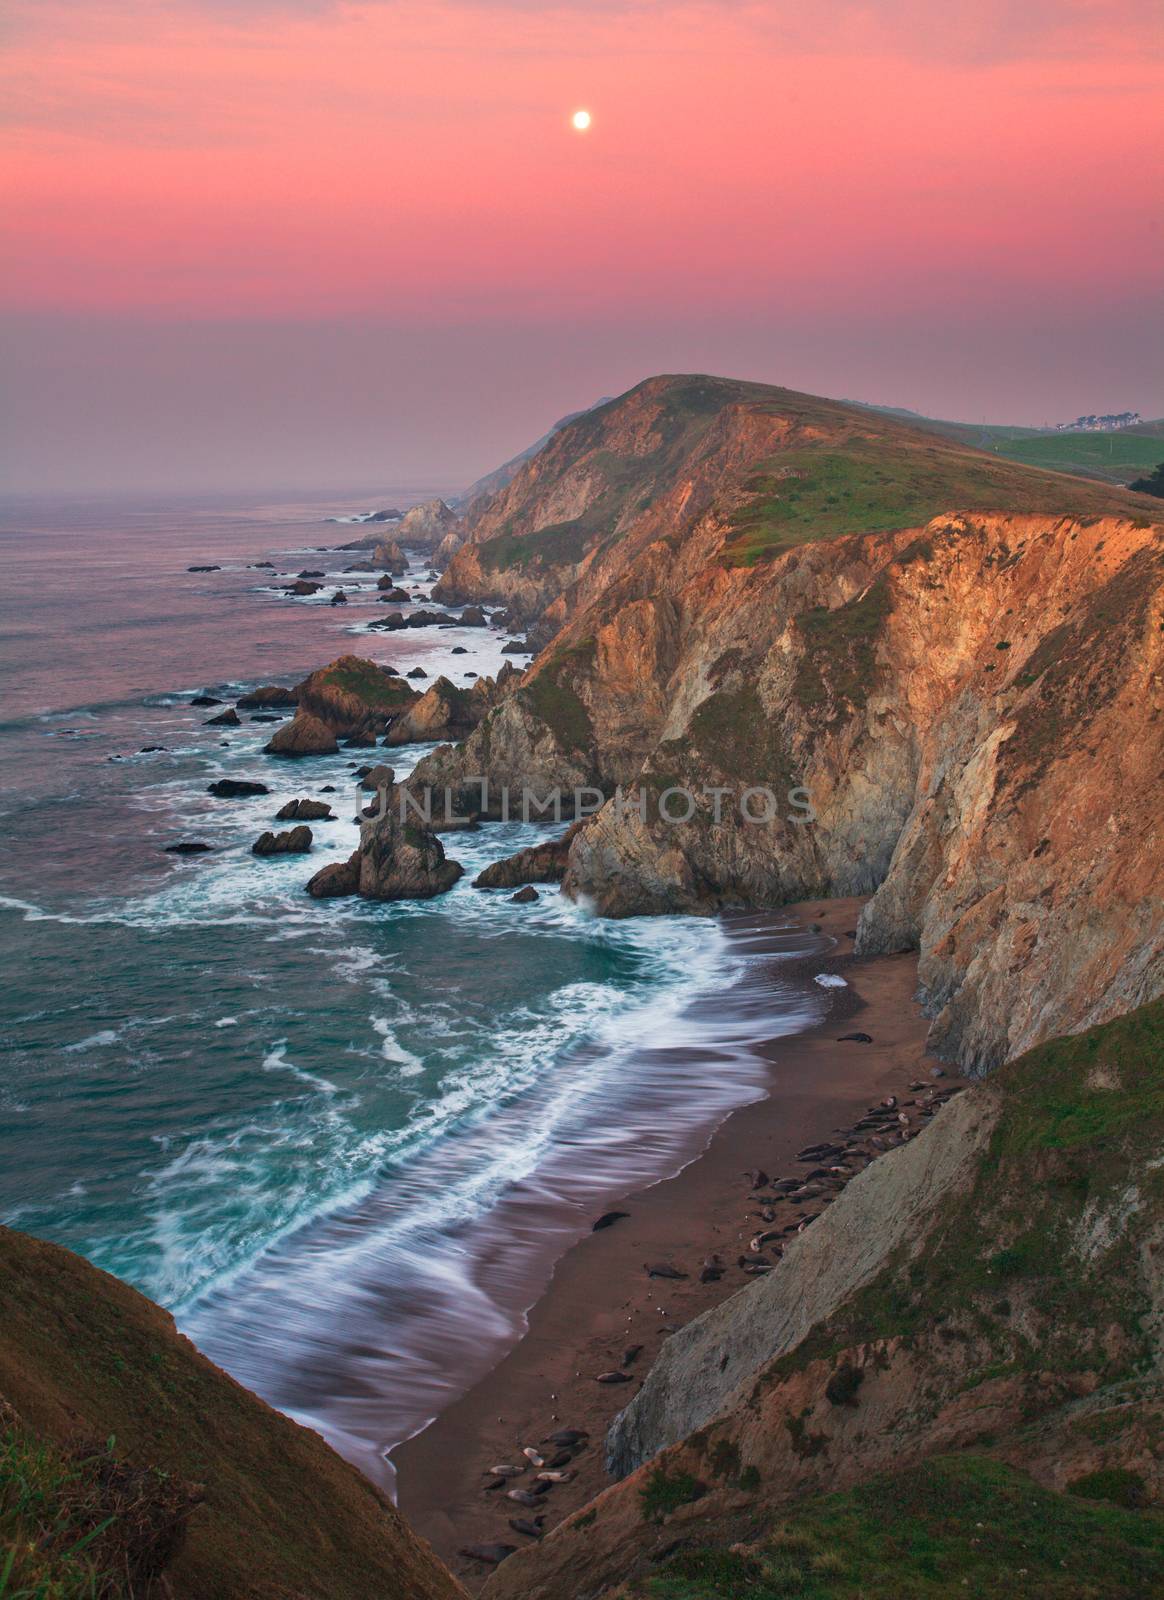 Point Reyes national seashore is just an hour north of San Francisco.